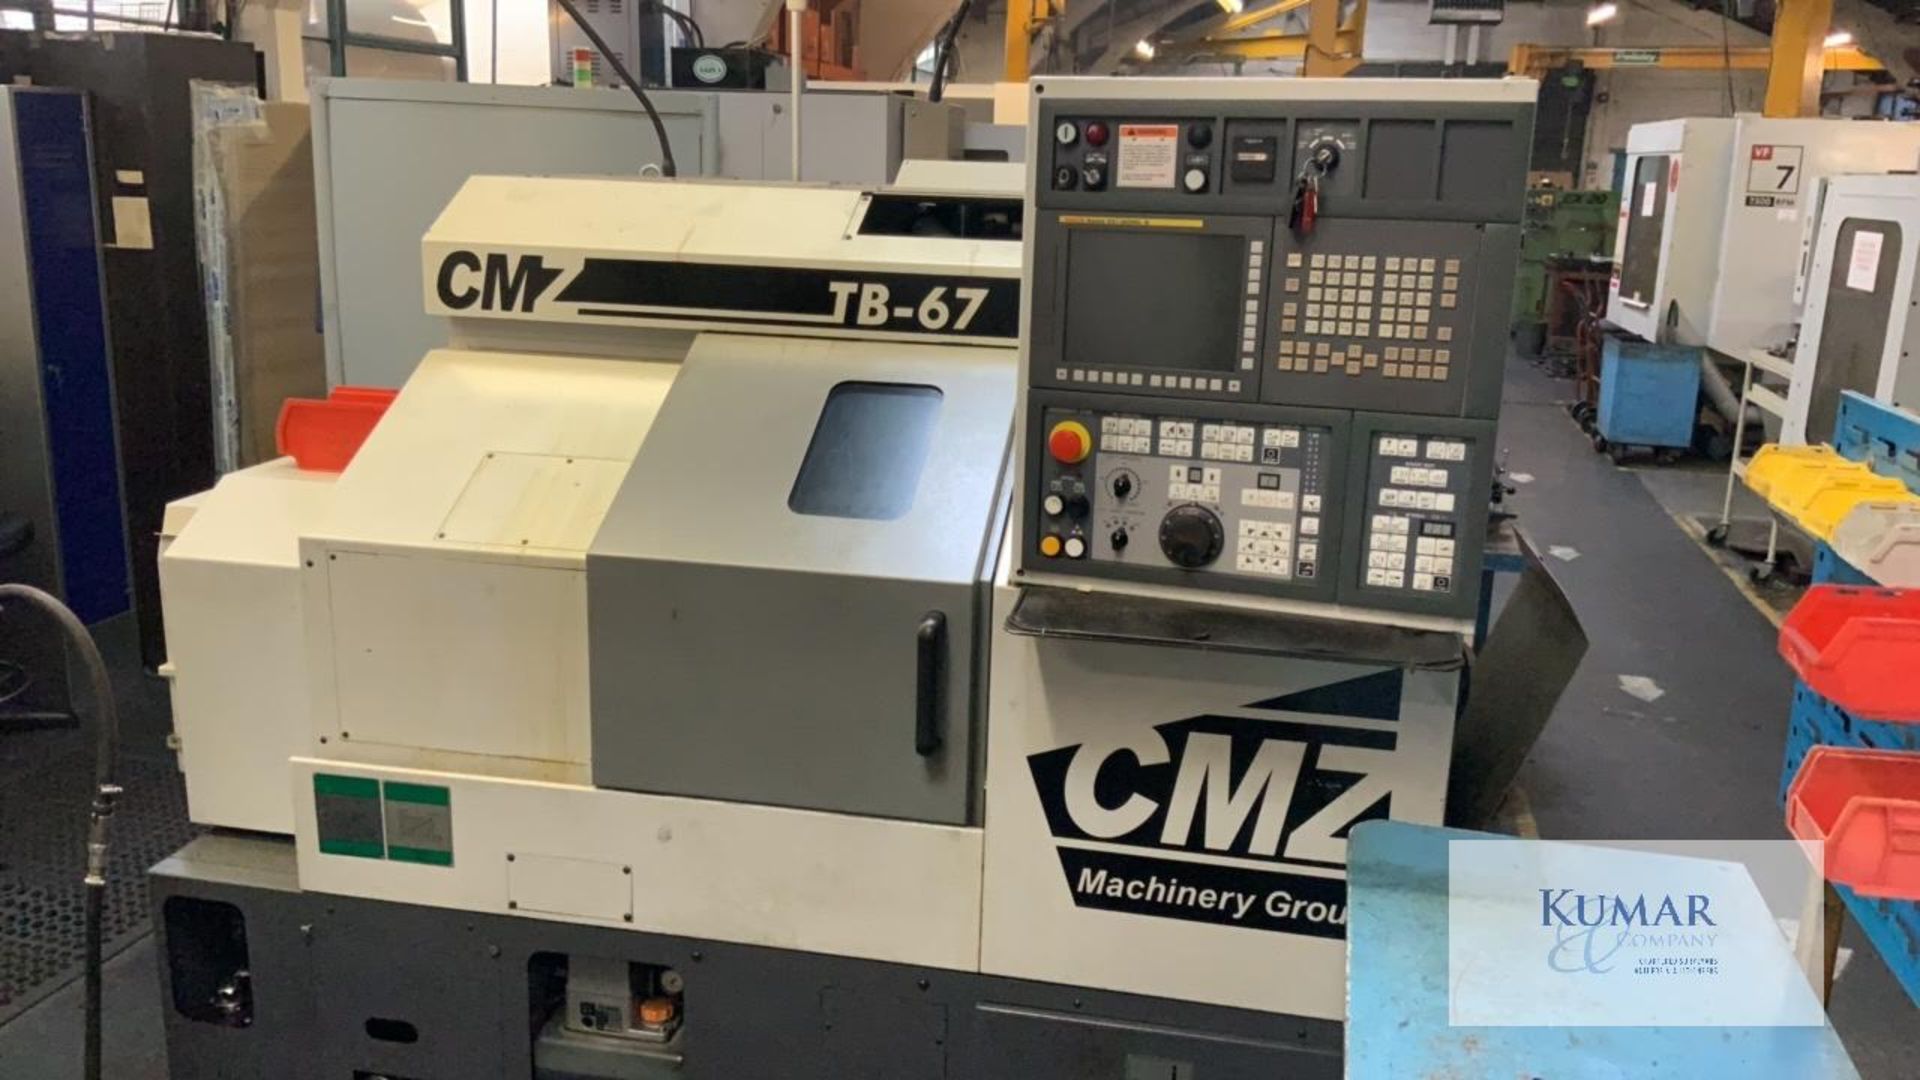 CMZ Model TB 67 CNC Slant Bed Lathe, Serial No TB497 (2013) including tooling and attachments as